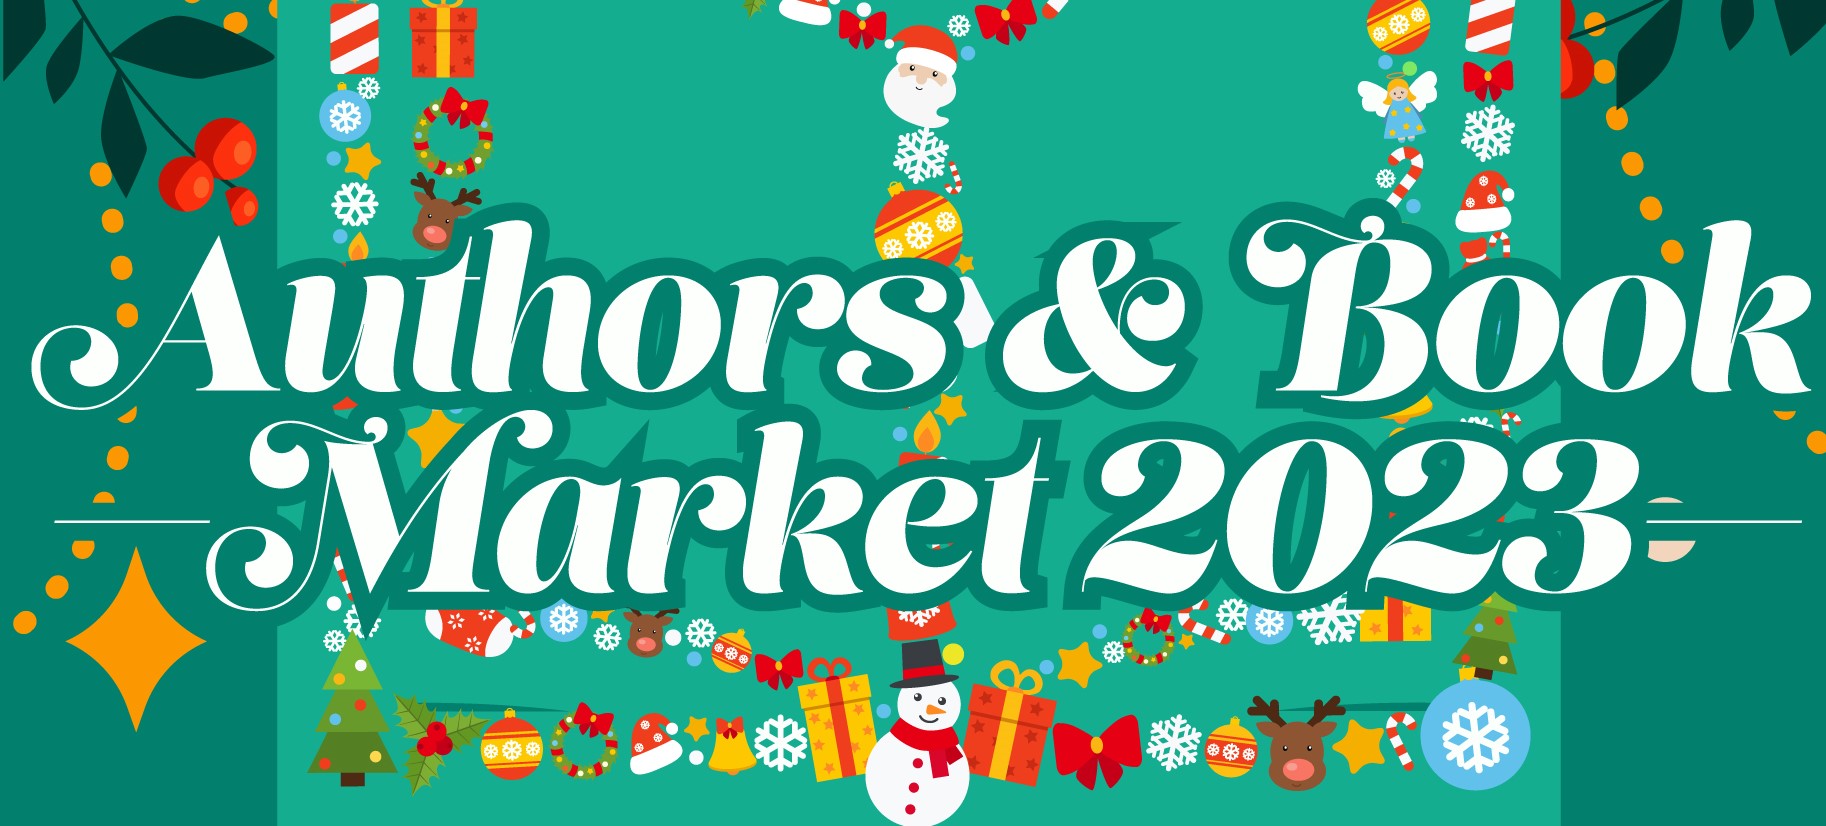 Christmas icons surrounding the text Authors and Book Market 2023